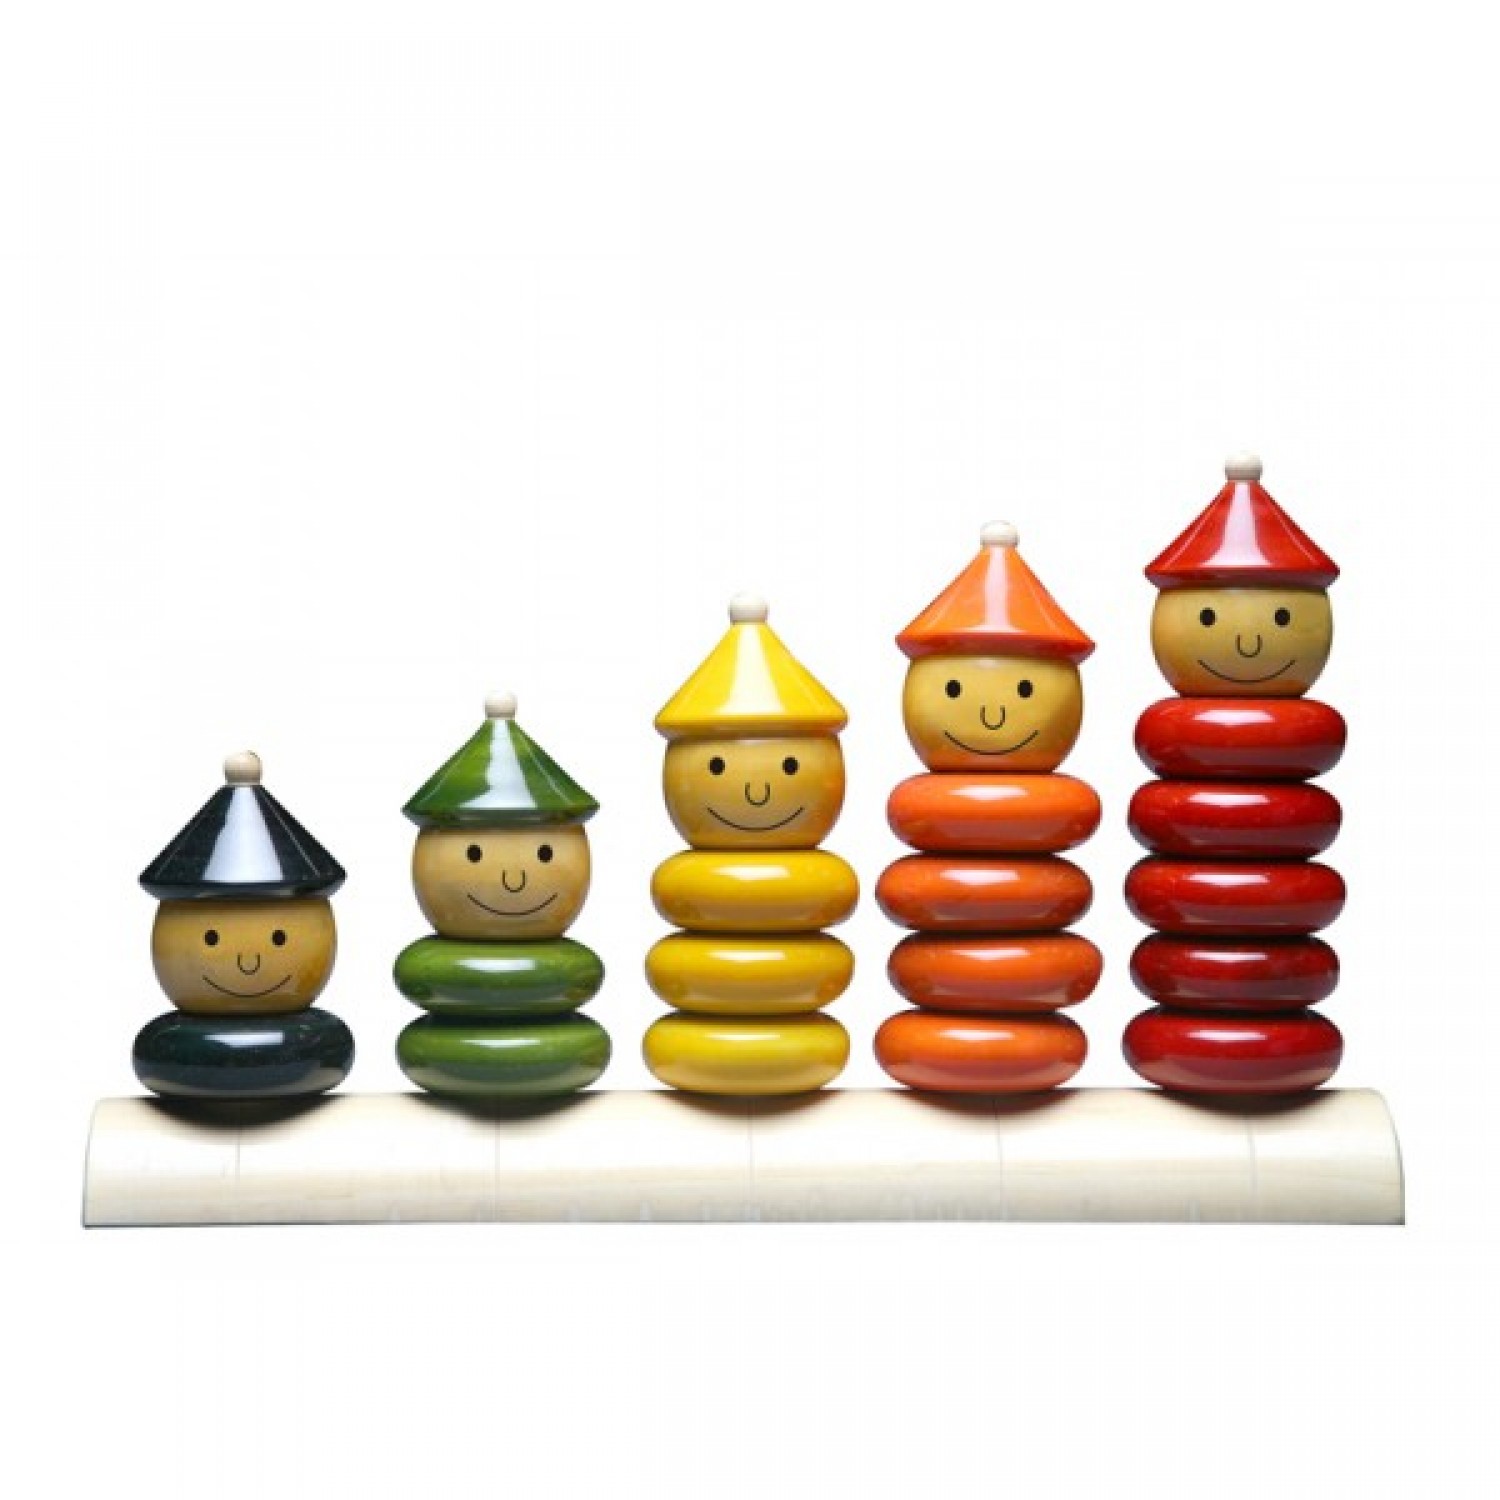 Peppy Five Eco Wooden Toy by Maya Organic